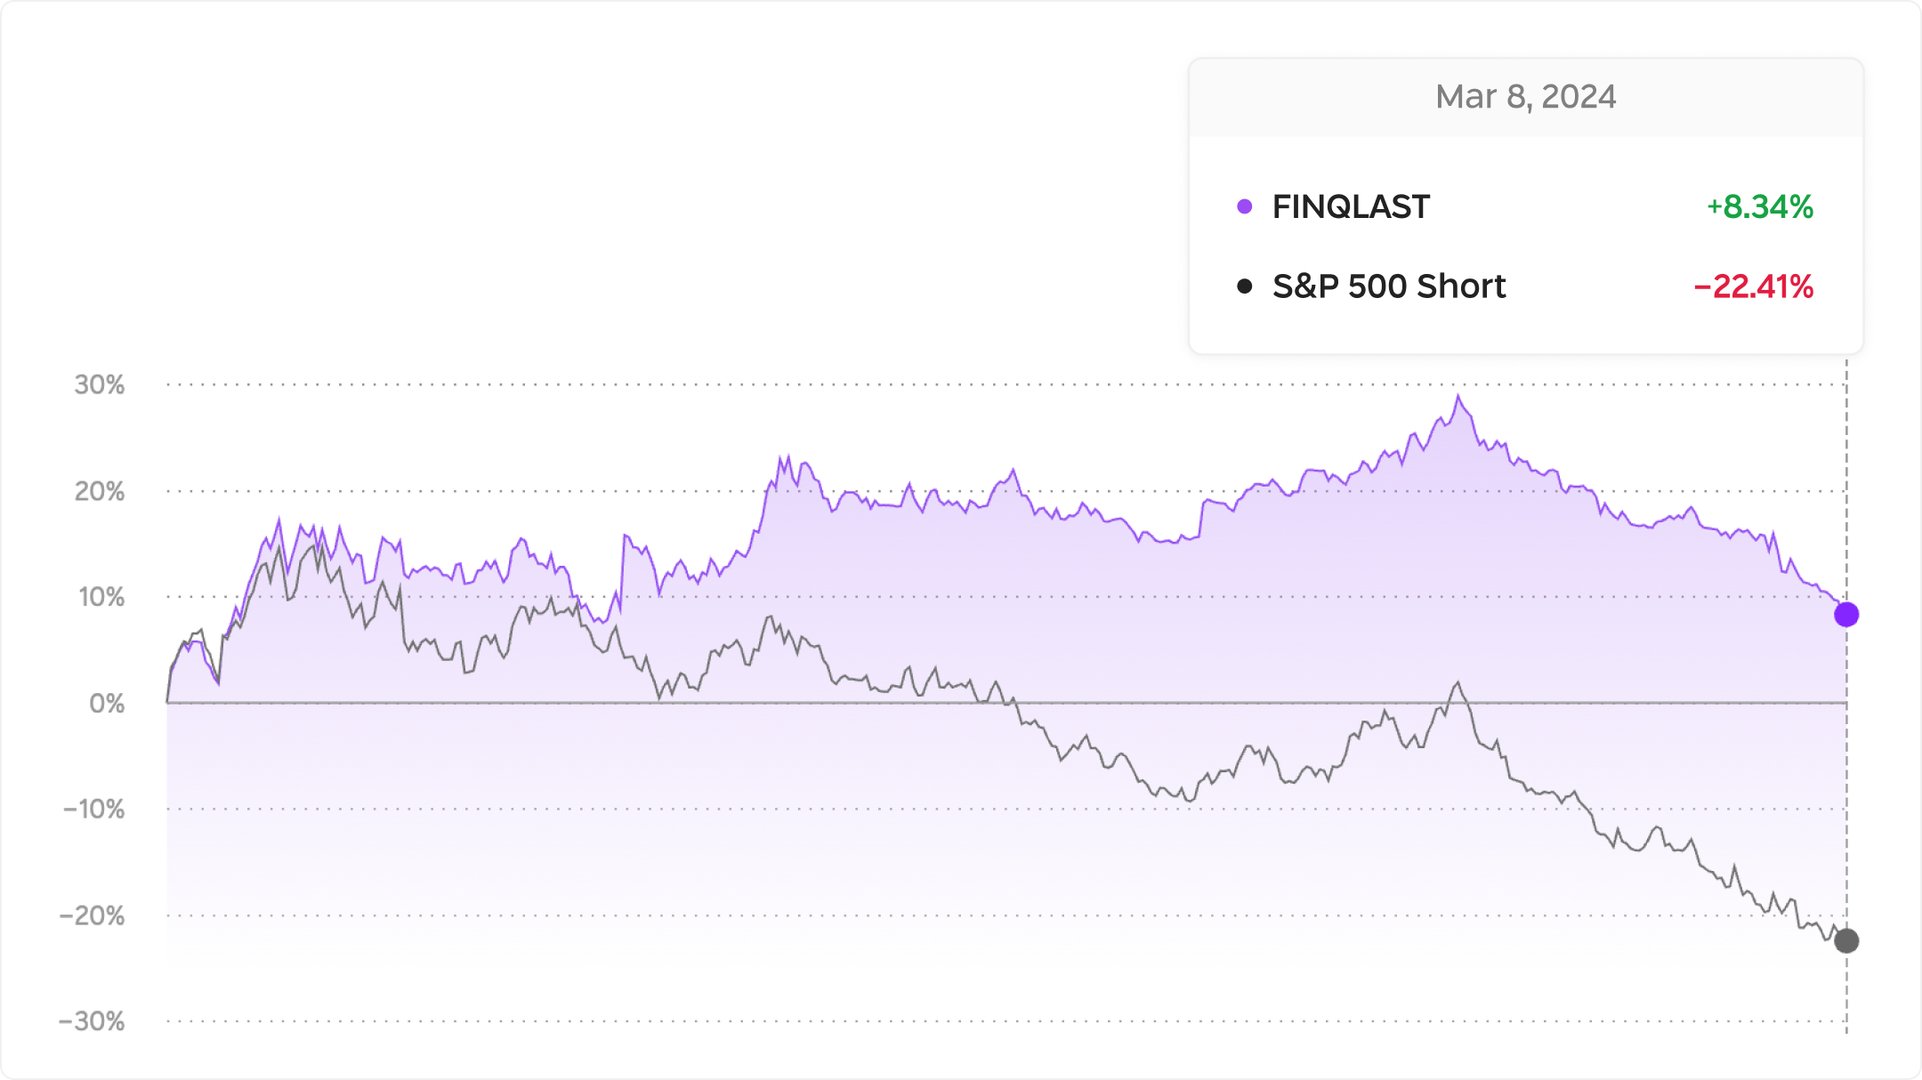 FINQLAST returns since inception as of March 08, 2024